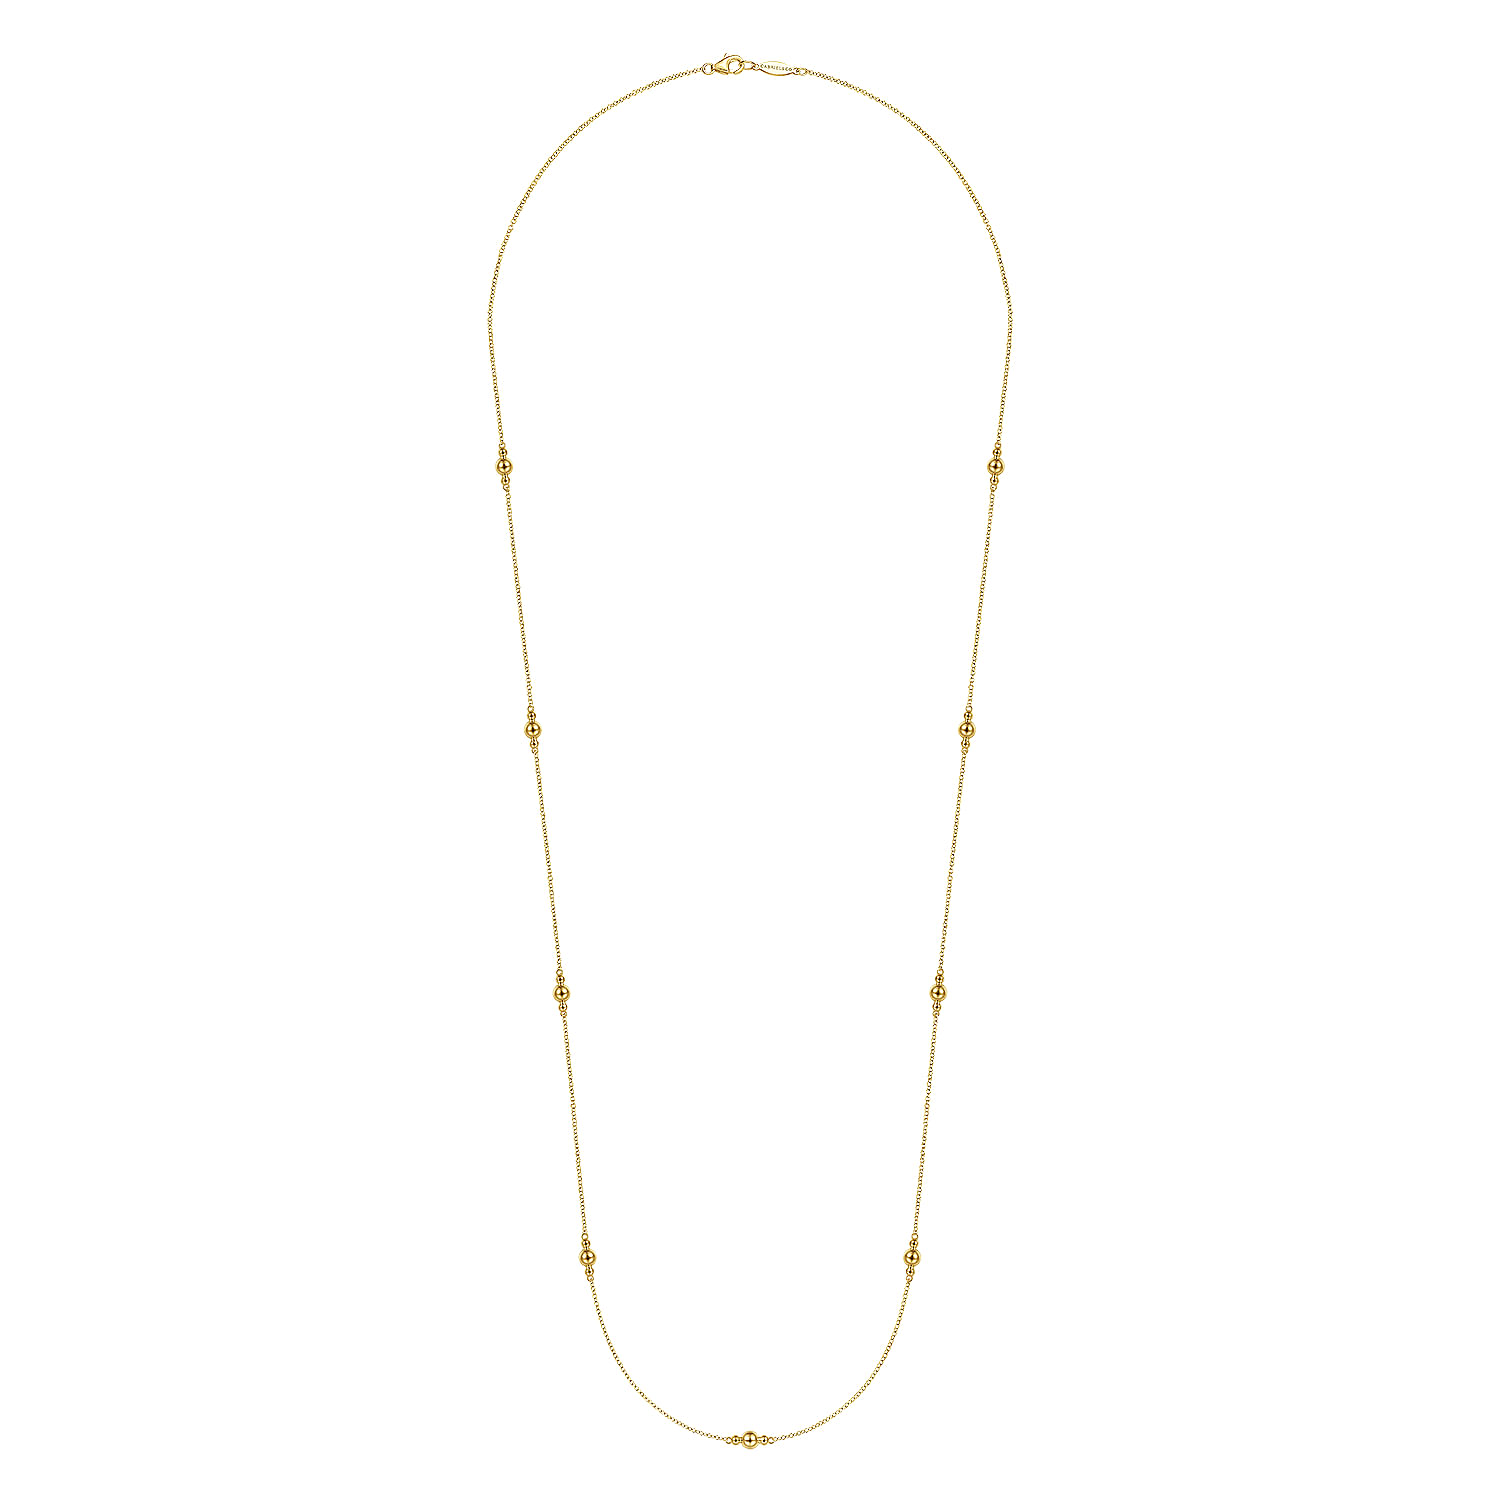 28 inch 14K Yellow Gold Bujukan Bead Station Necklace